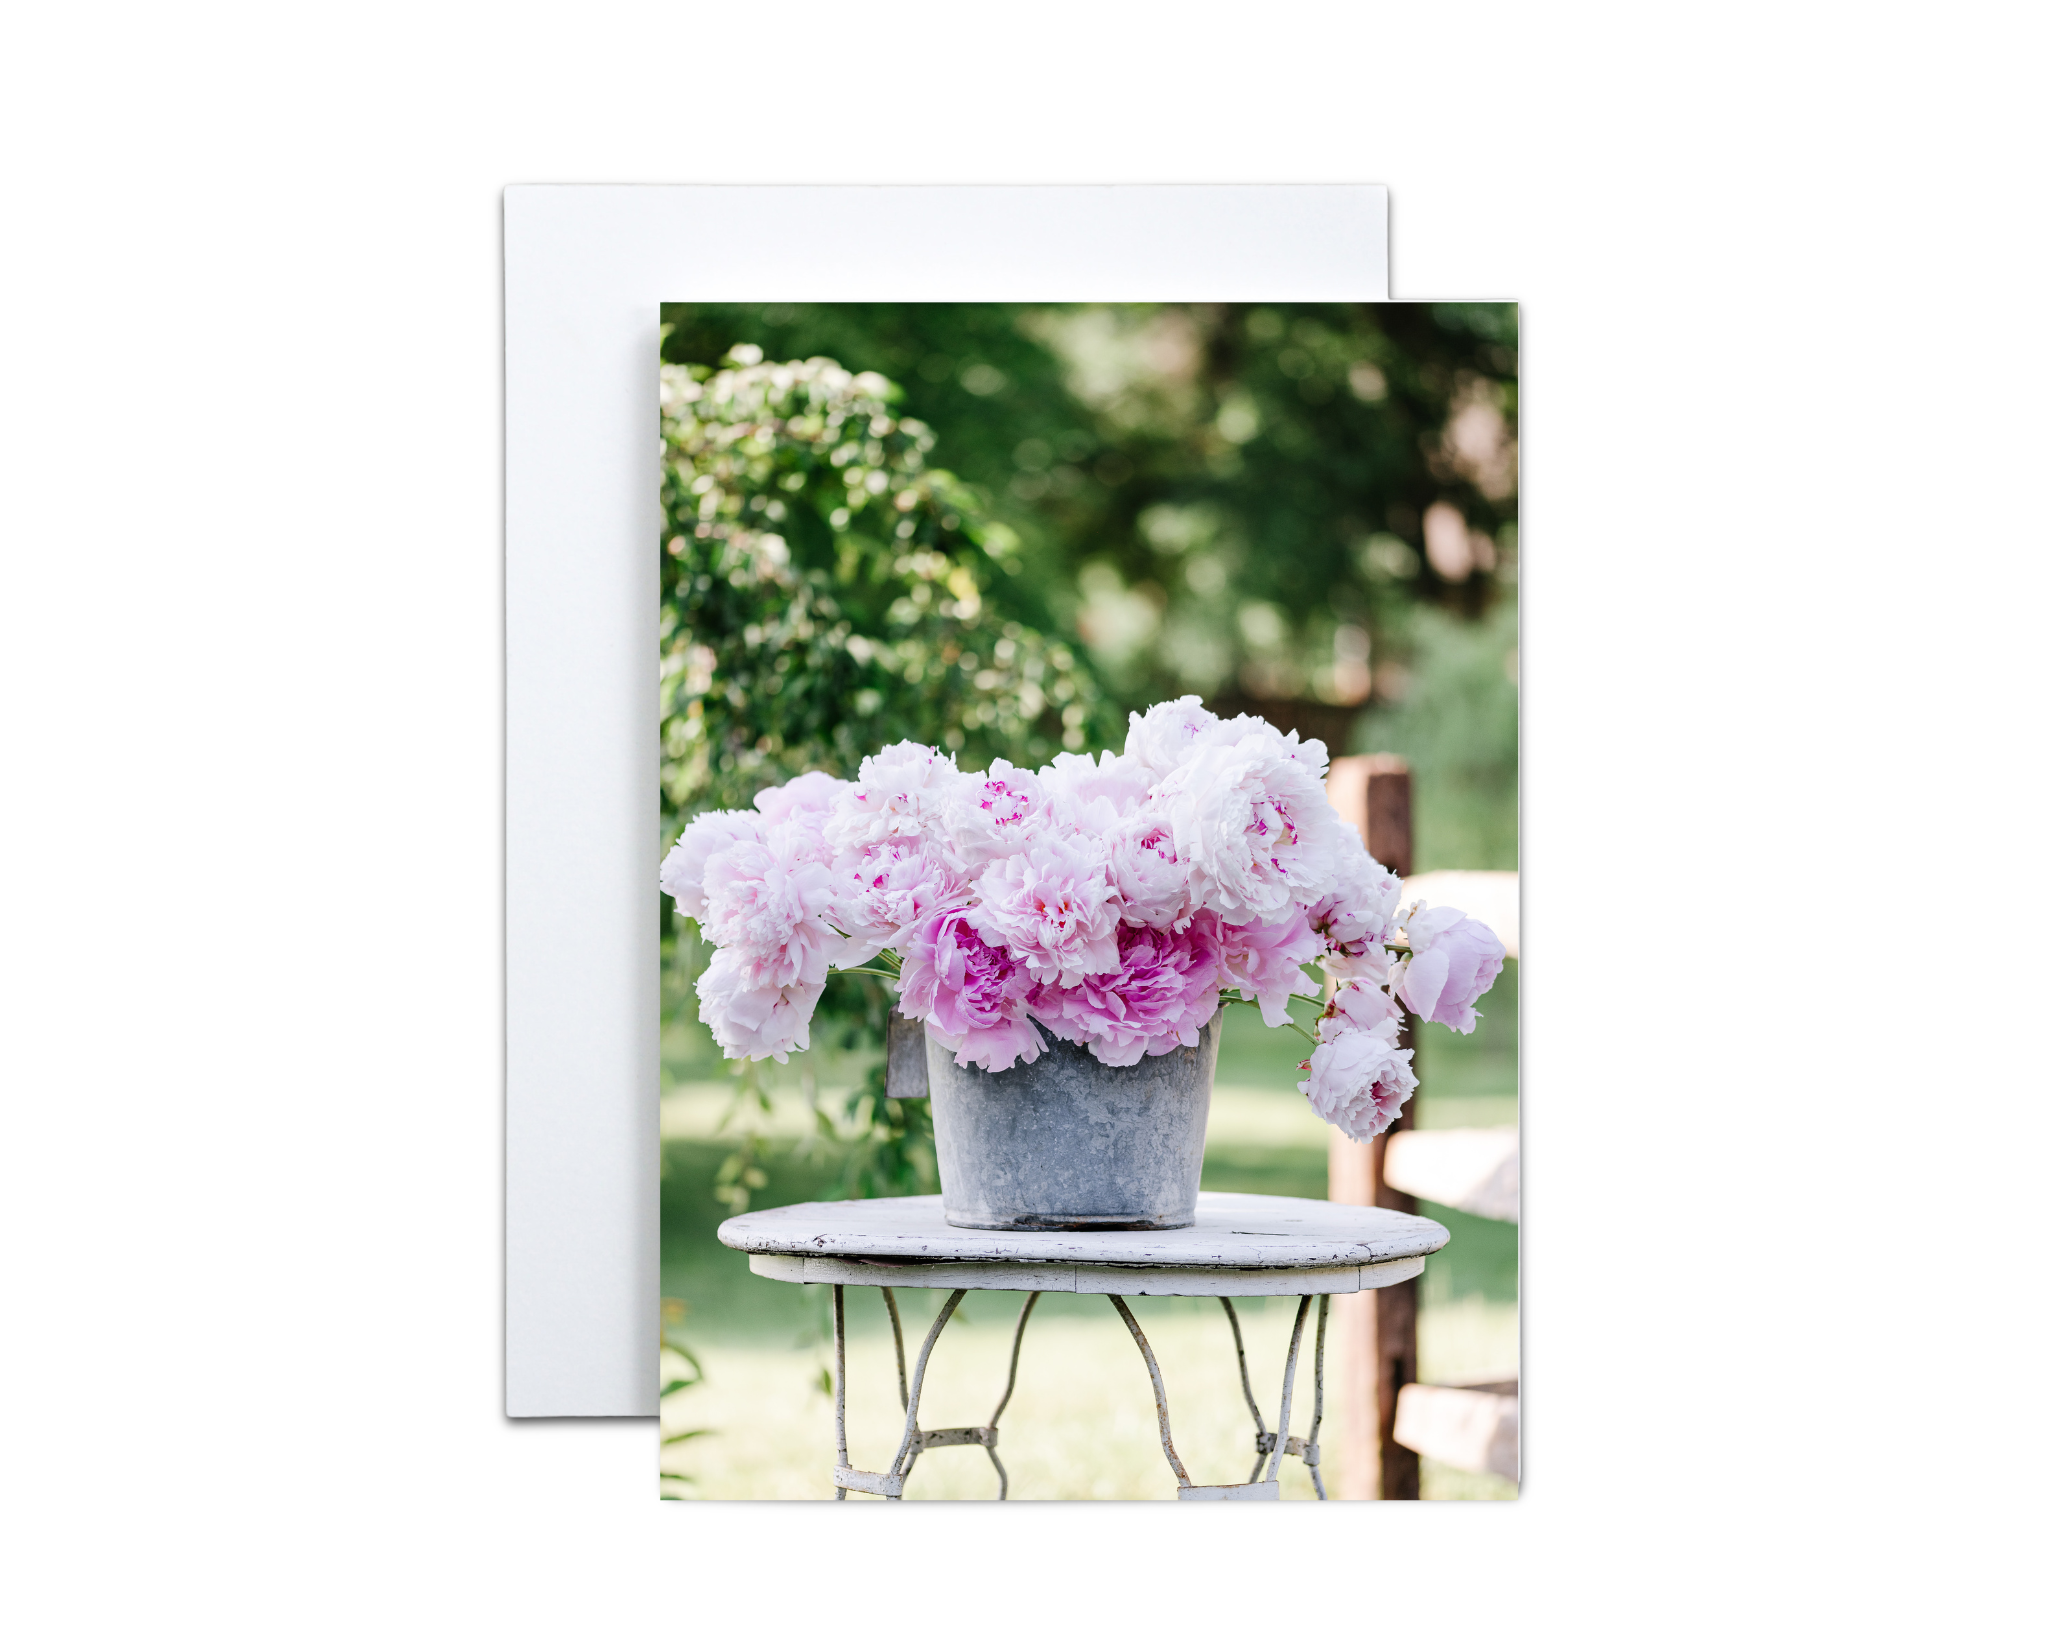 Greeting Card/Notecard. A vintage calf bucket filled with fluffy peonies. The peonies are grown, harvested, and photographed on our farmland.